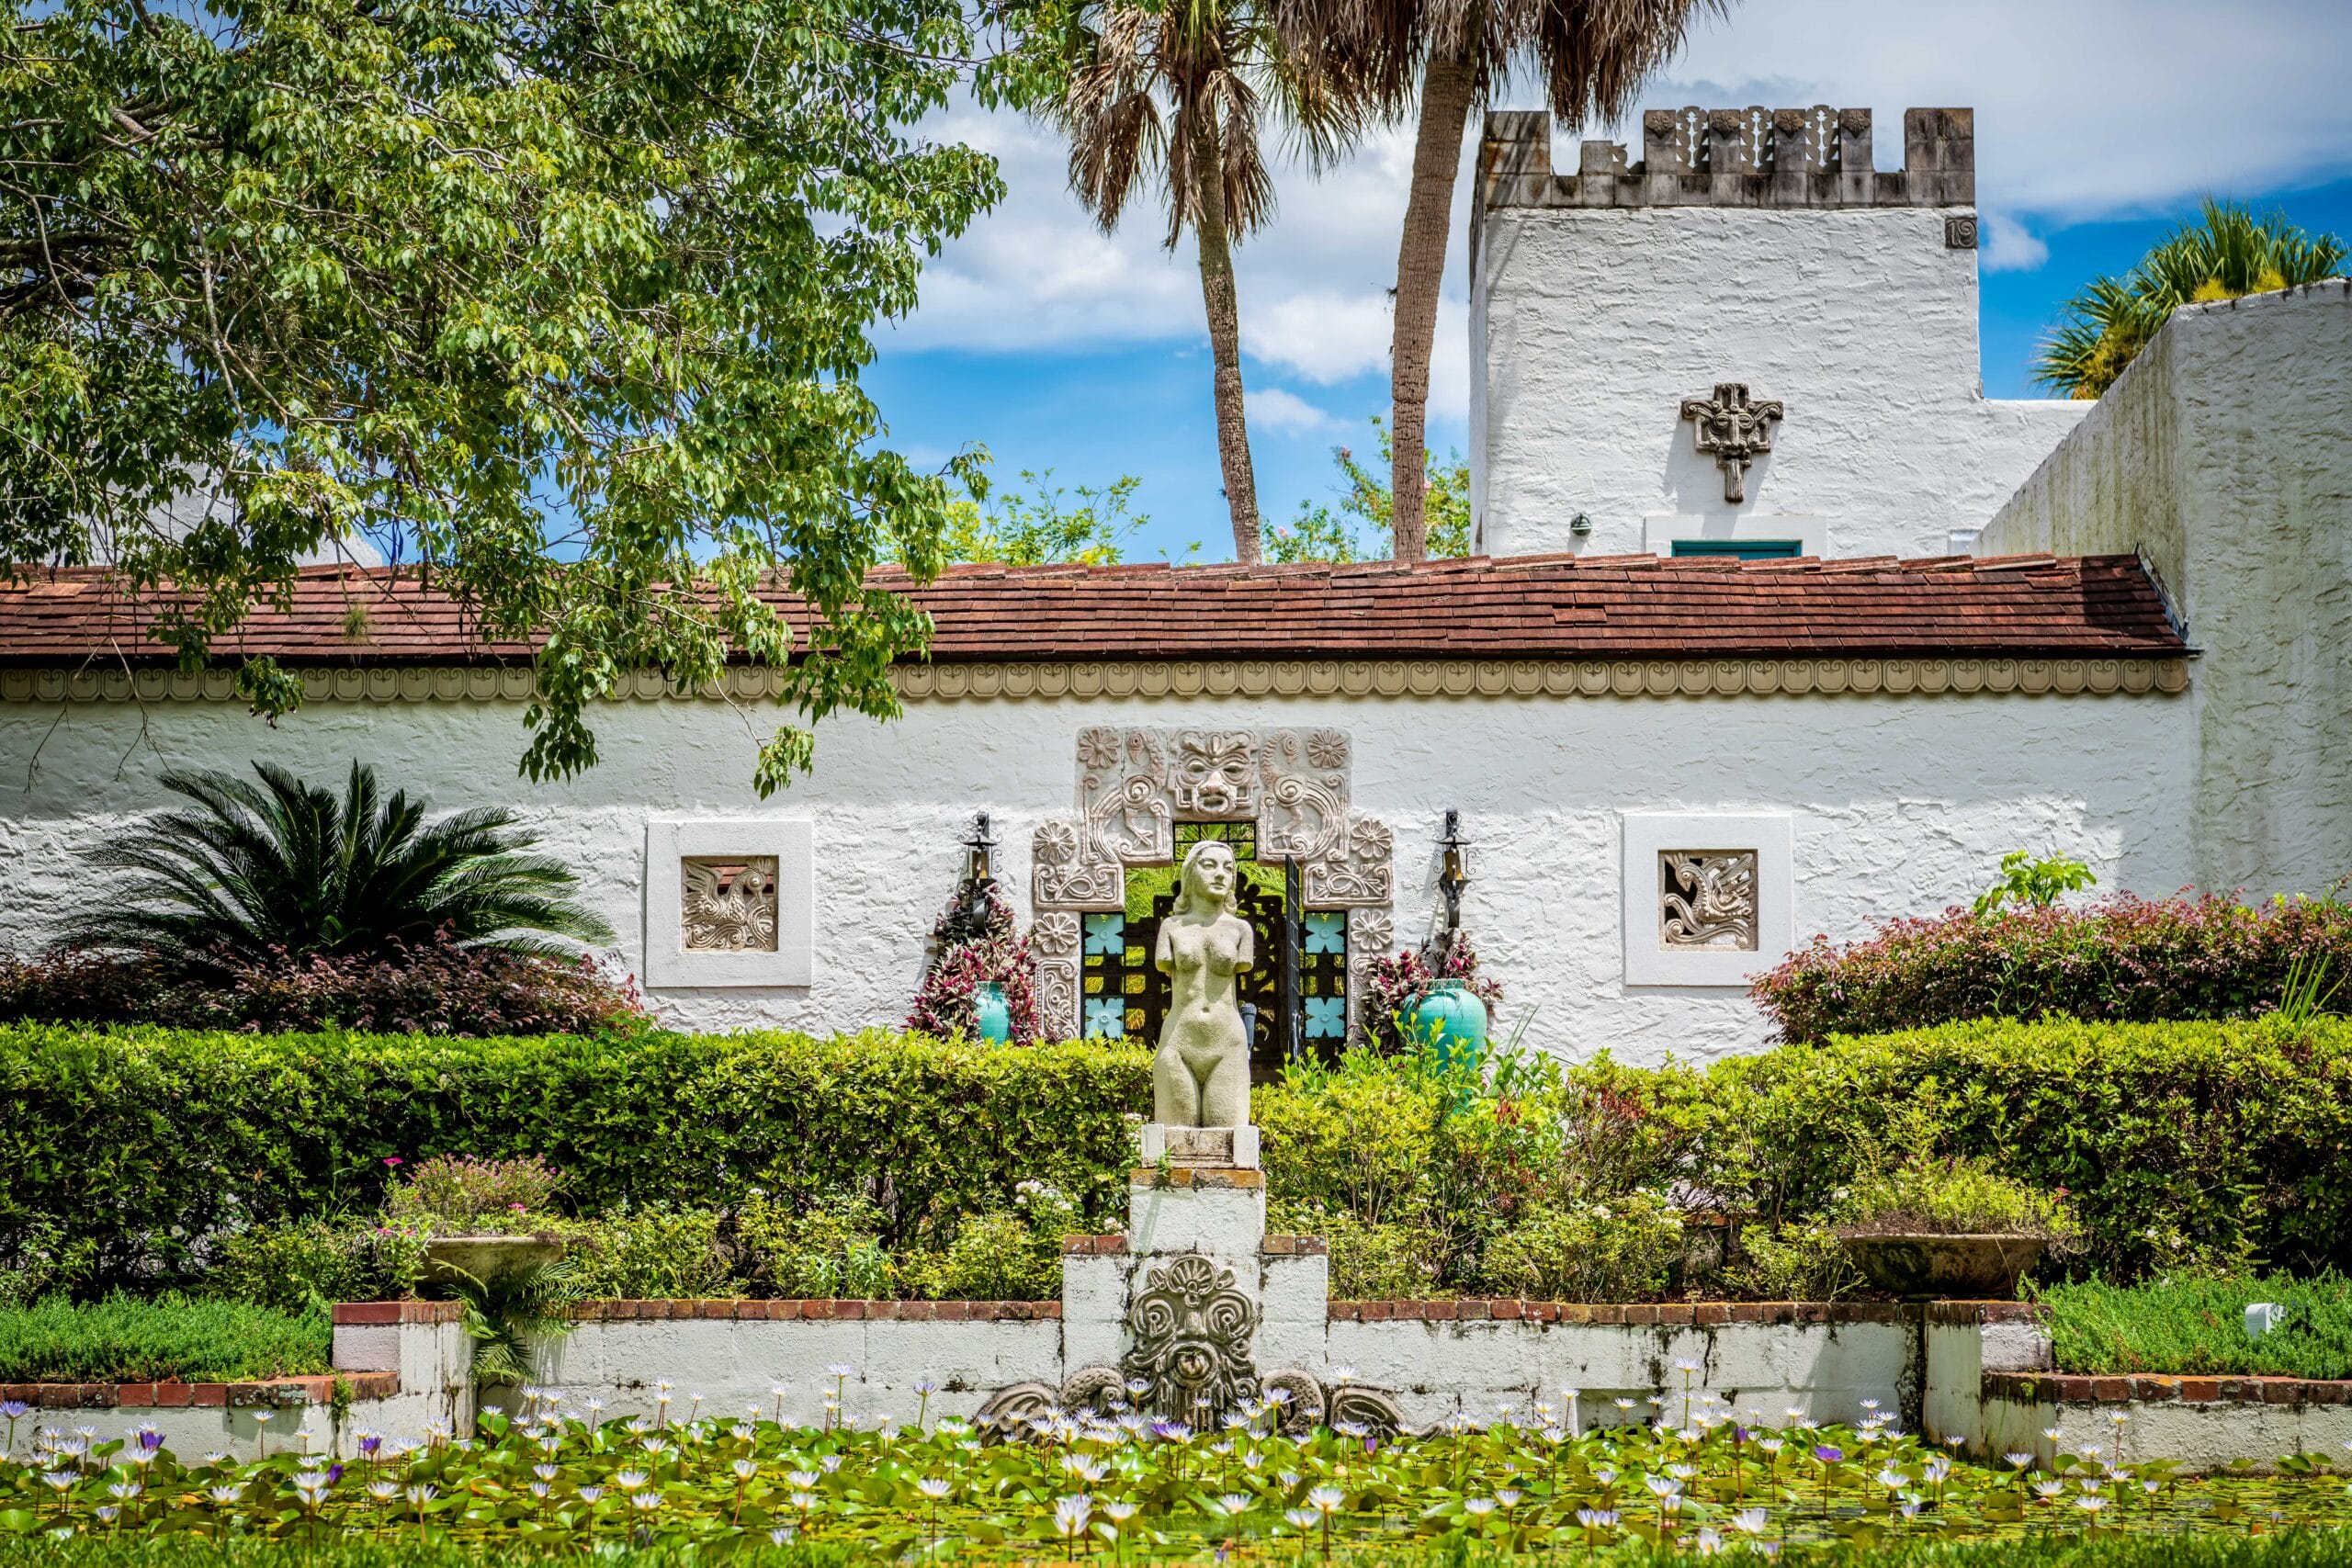 A pond full of blooming lilies is topped with a beautiful bust of Venus-style sculpture of a woman. She is framed by an intricately carved doorframe on a white stucco castle behind her. The castle is decorated with more carvings on its sides and atop its tall tower. Lush tropical plant life surrounds the scene.